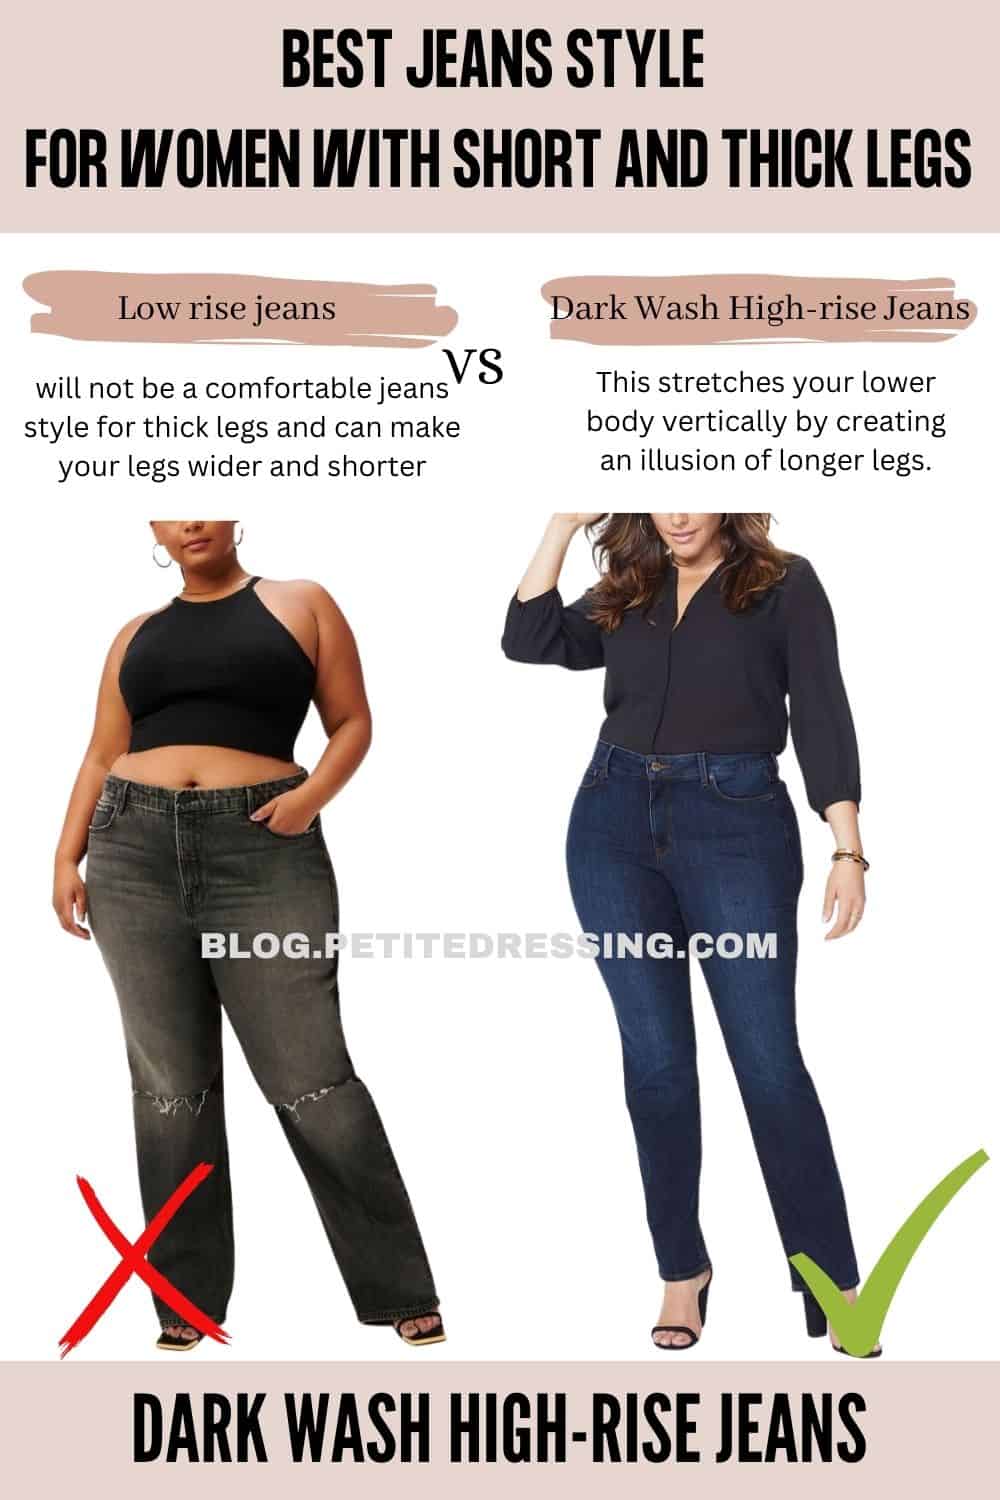 Jeans Style Guide for Women with Short and Thick Legs